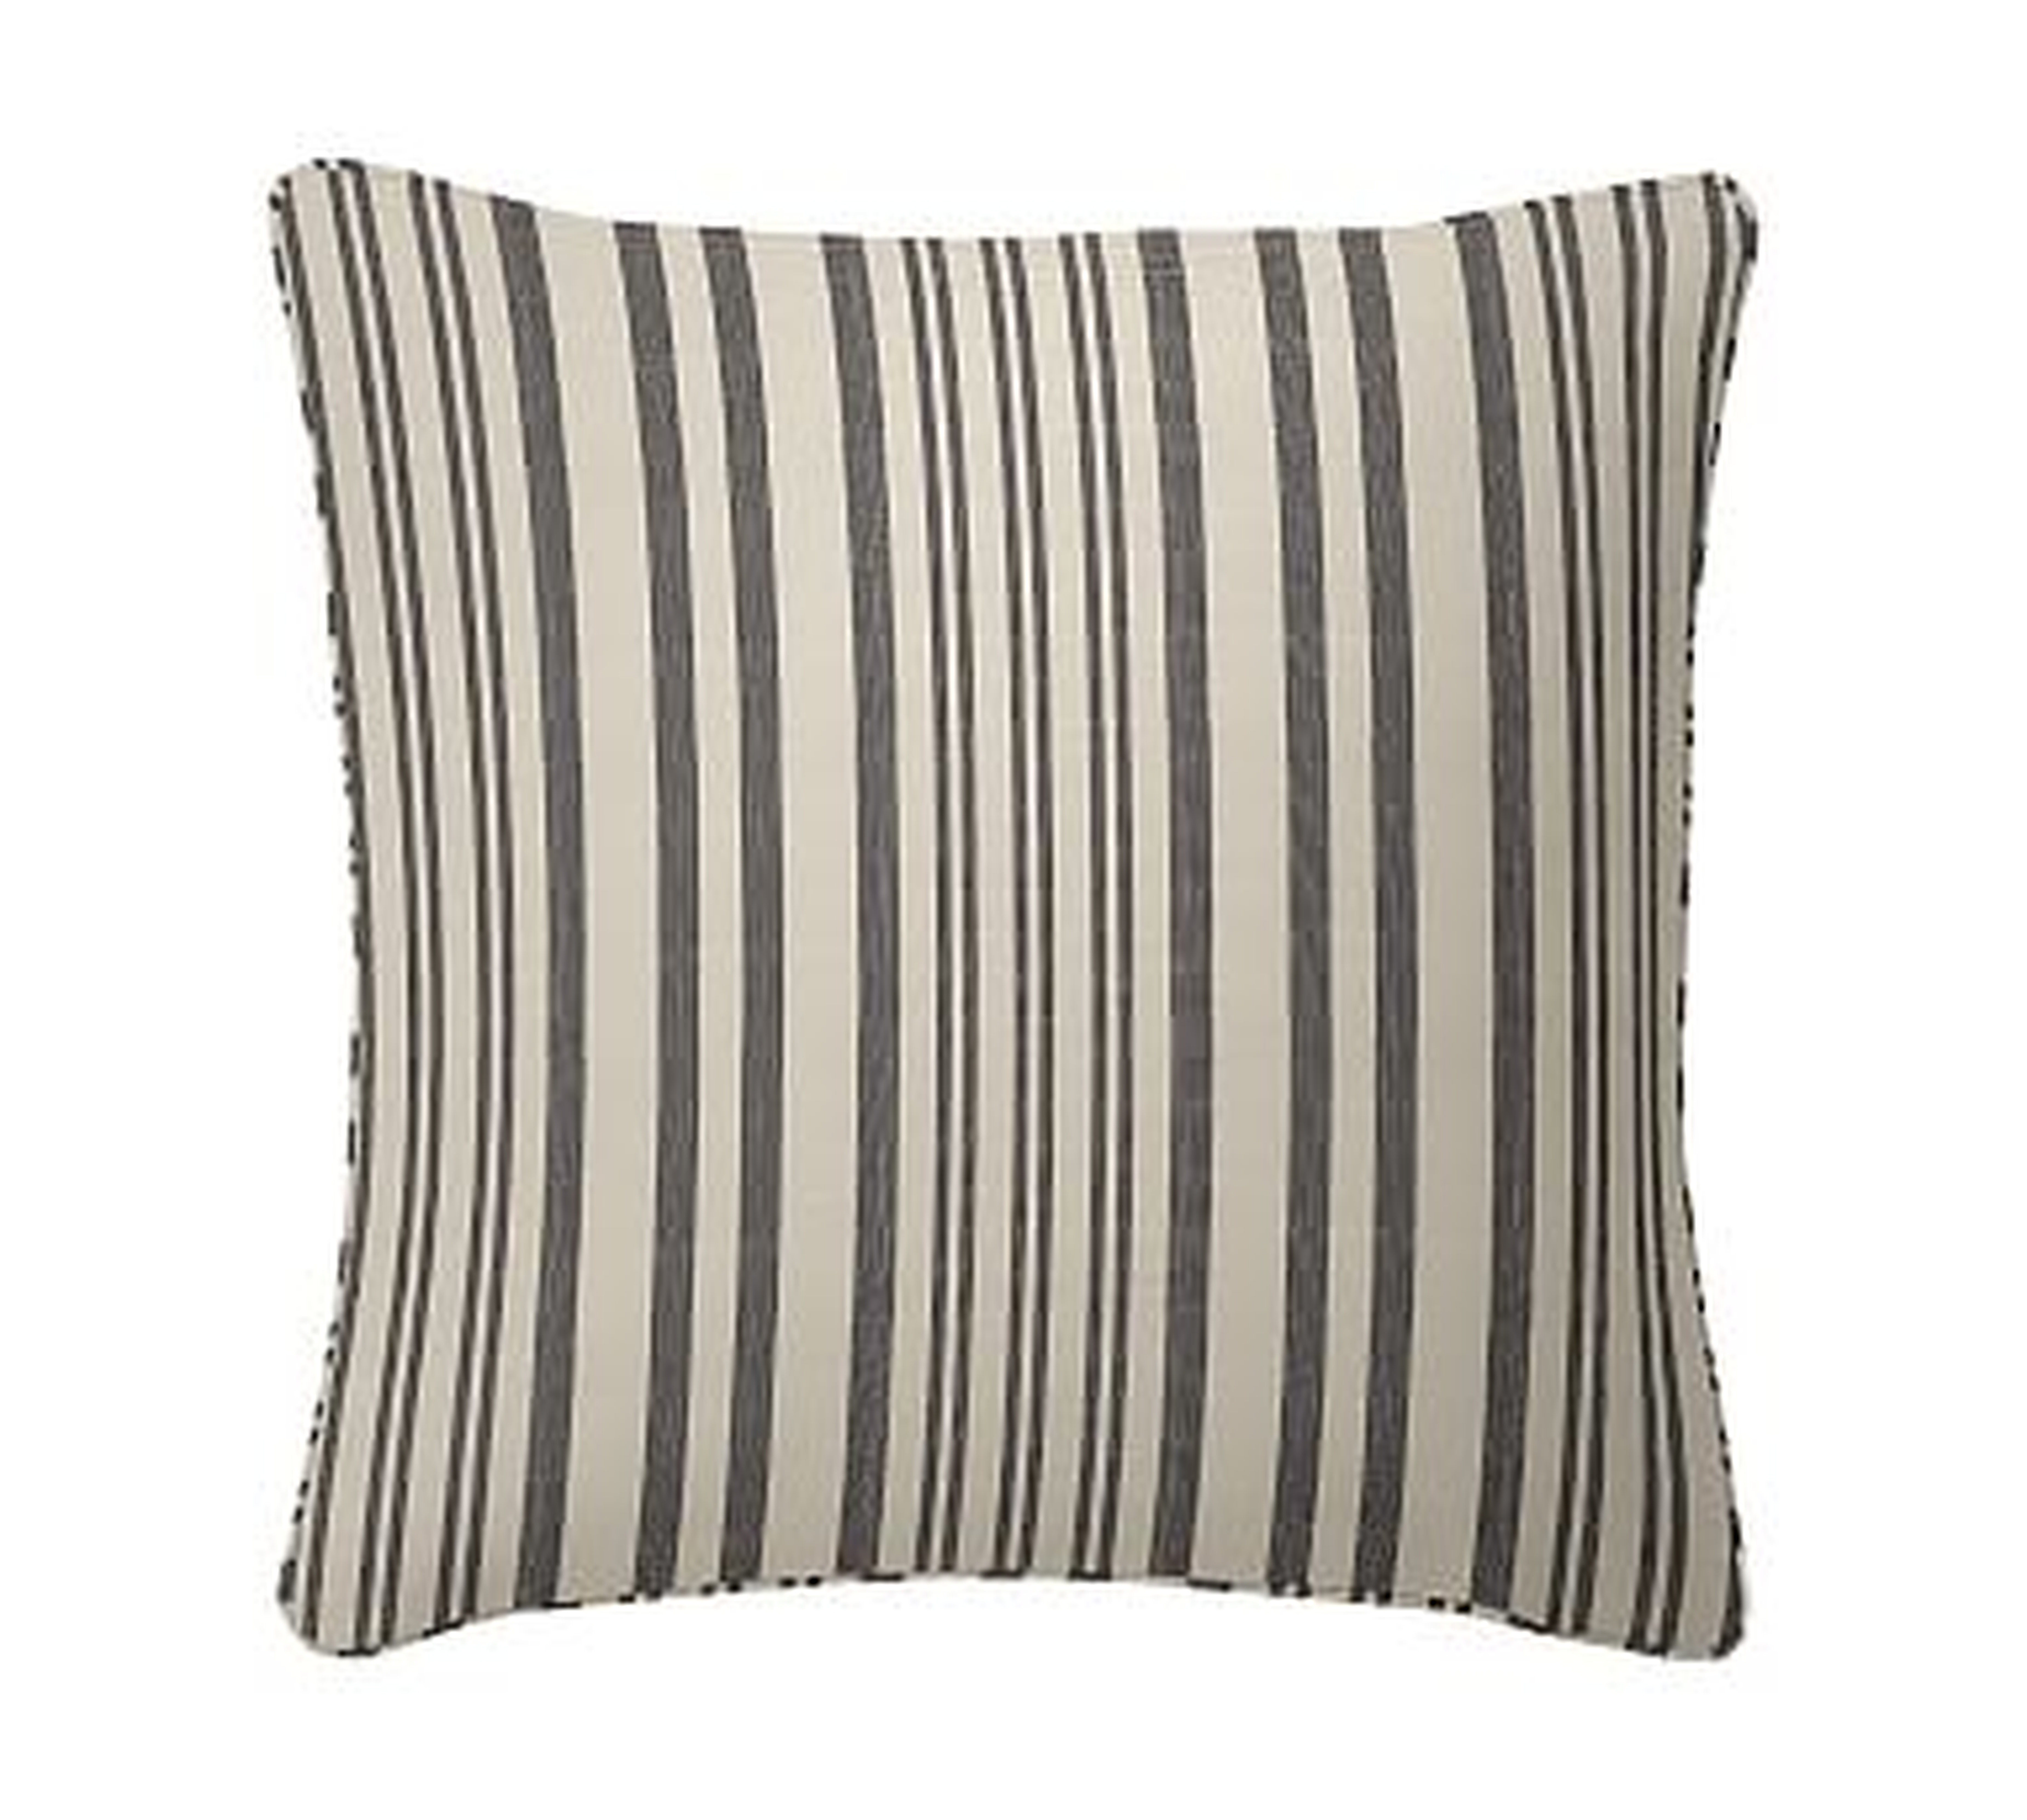 Antique Striped Print Pillow Cover, 20", Gray - Pottery Barn